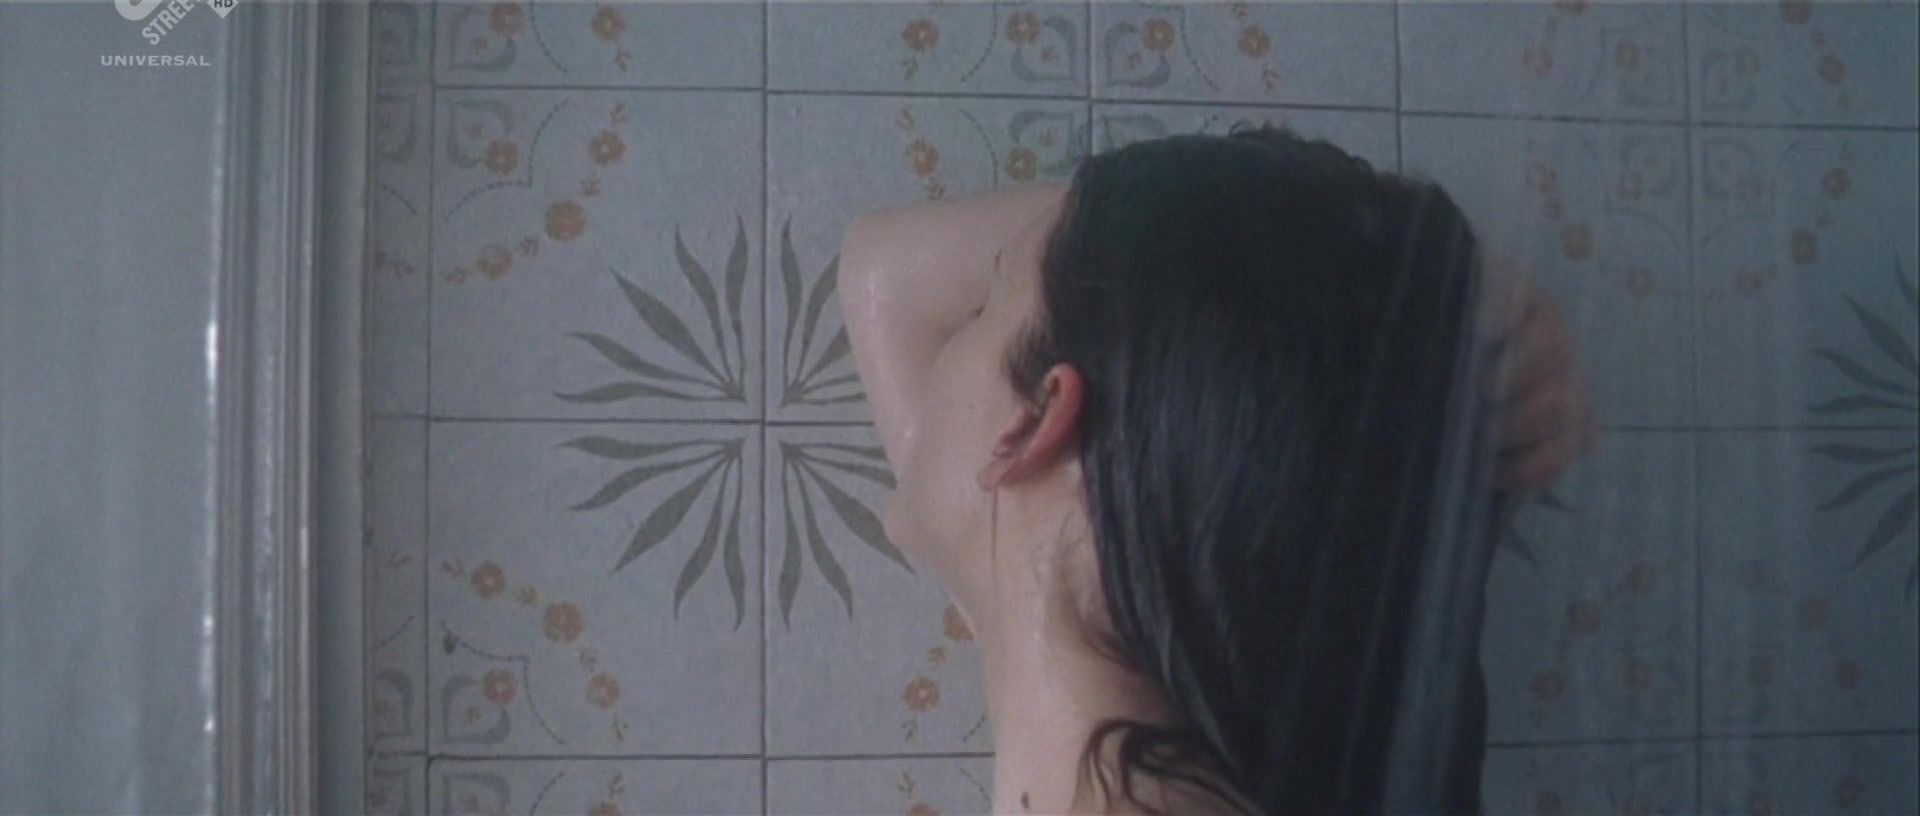 Monster Topless Melanie Laurent from Shower Video of the French movie "La chambre des morts" Lesbos